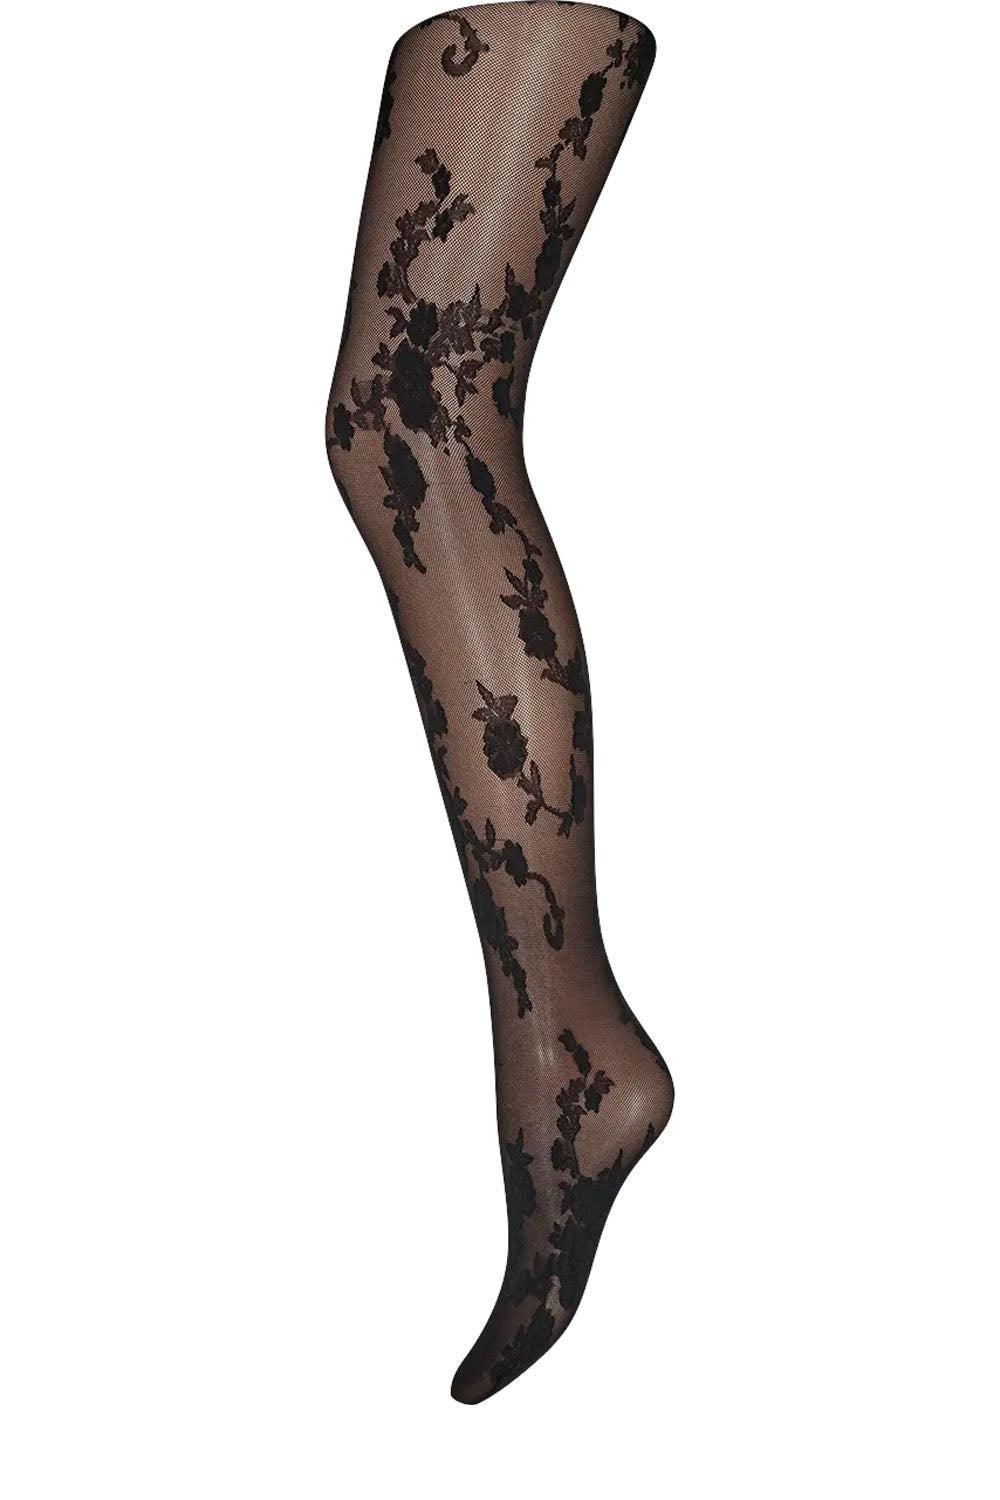 HYPETHEDETAIL tights lace  25 app